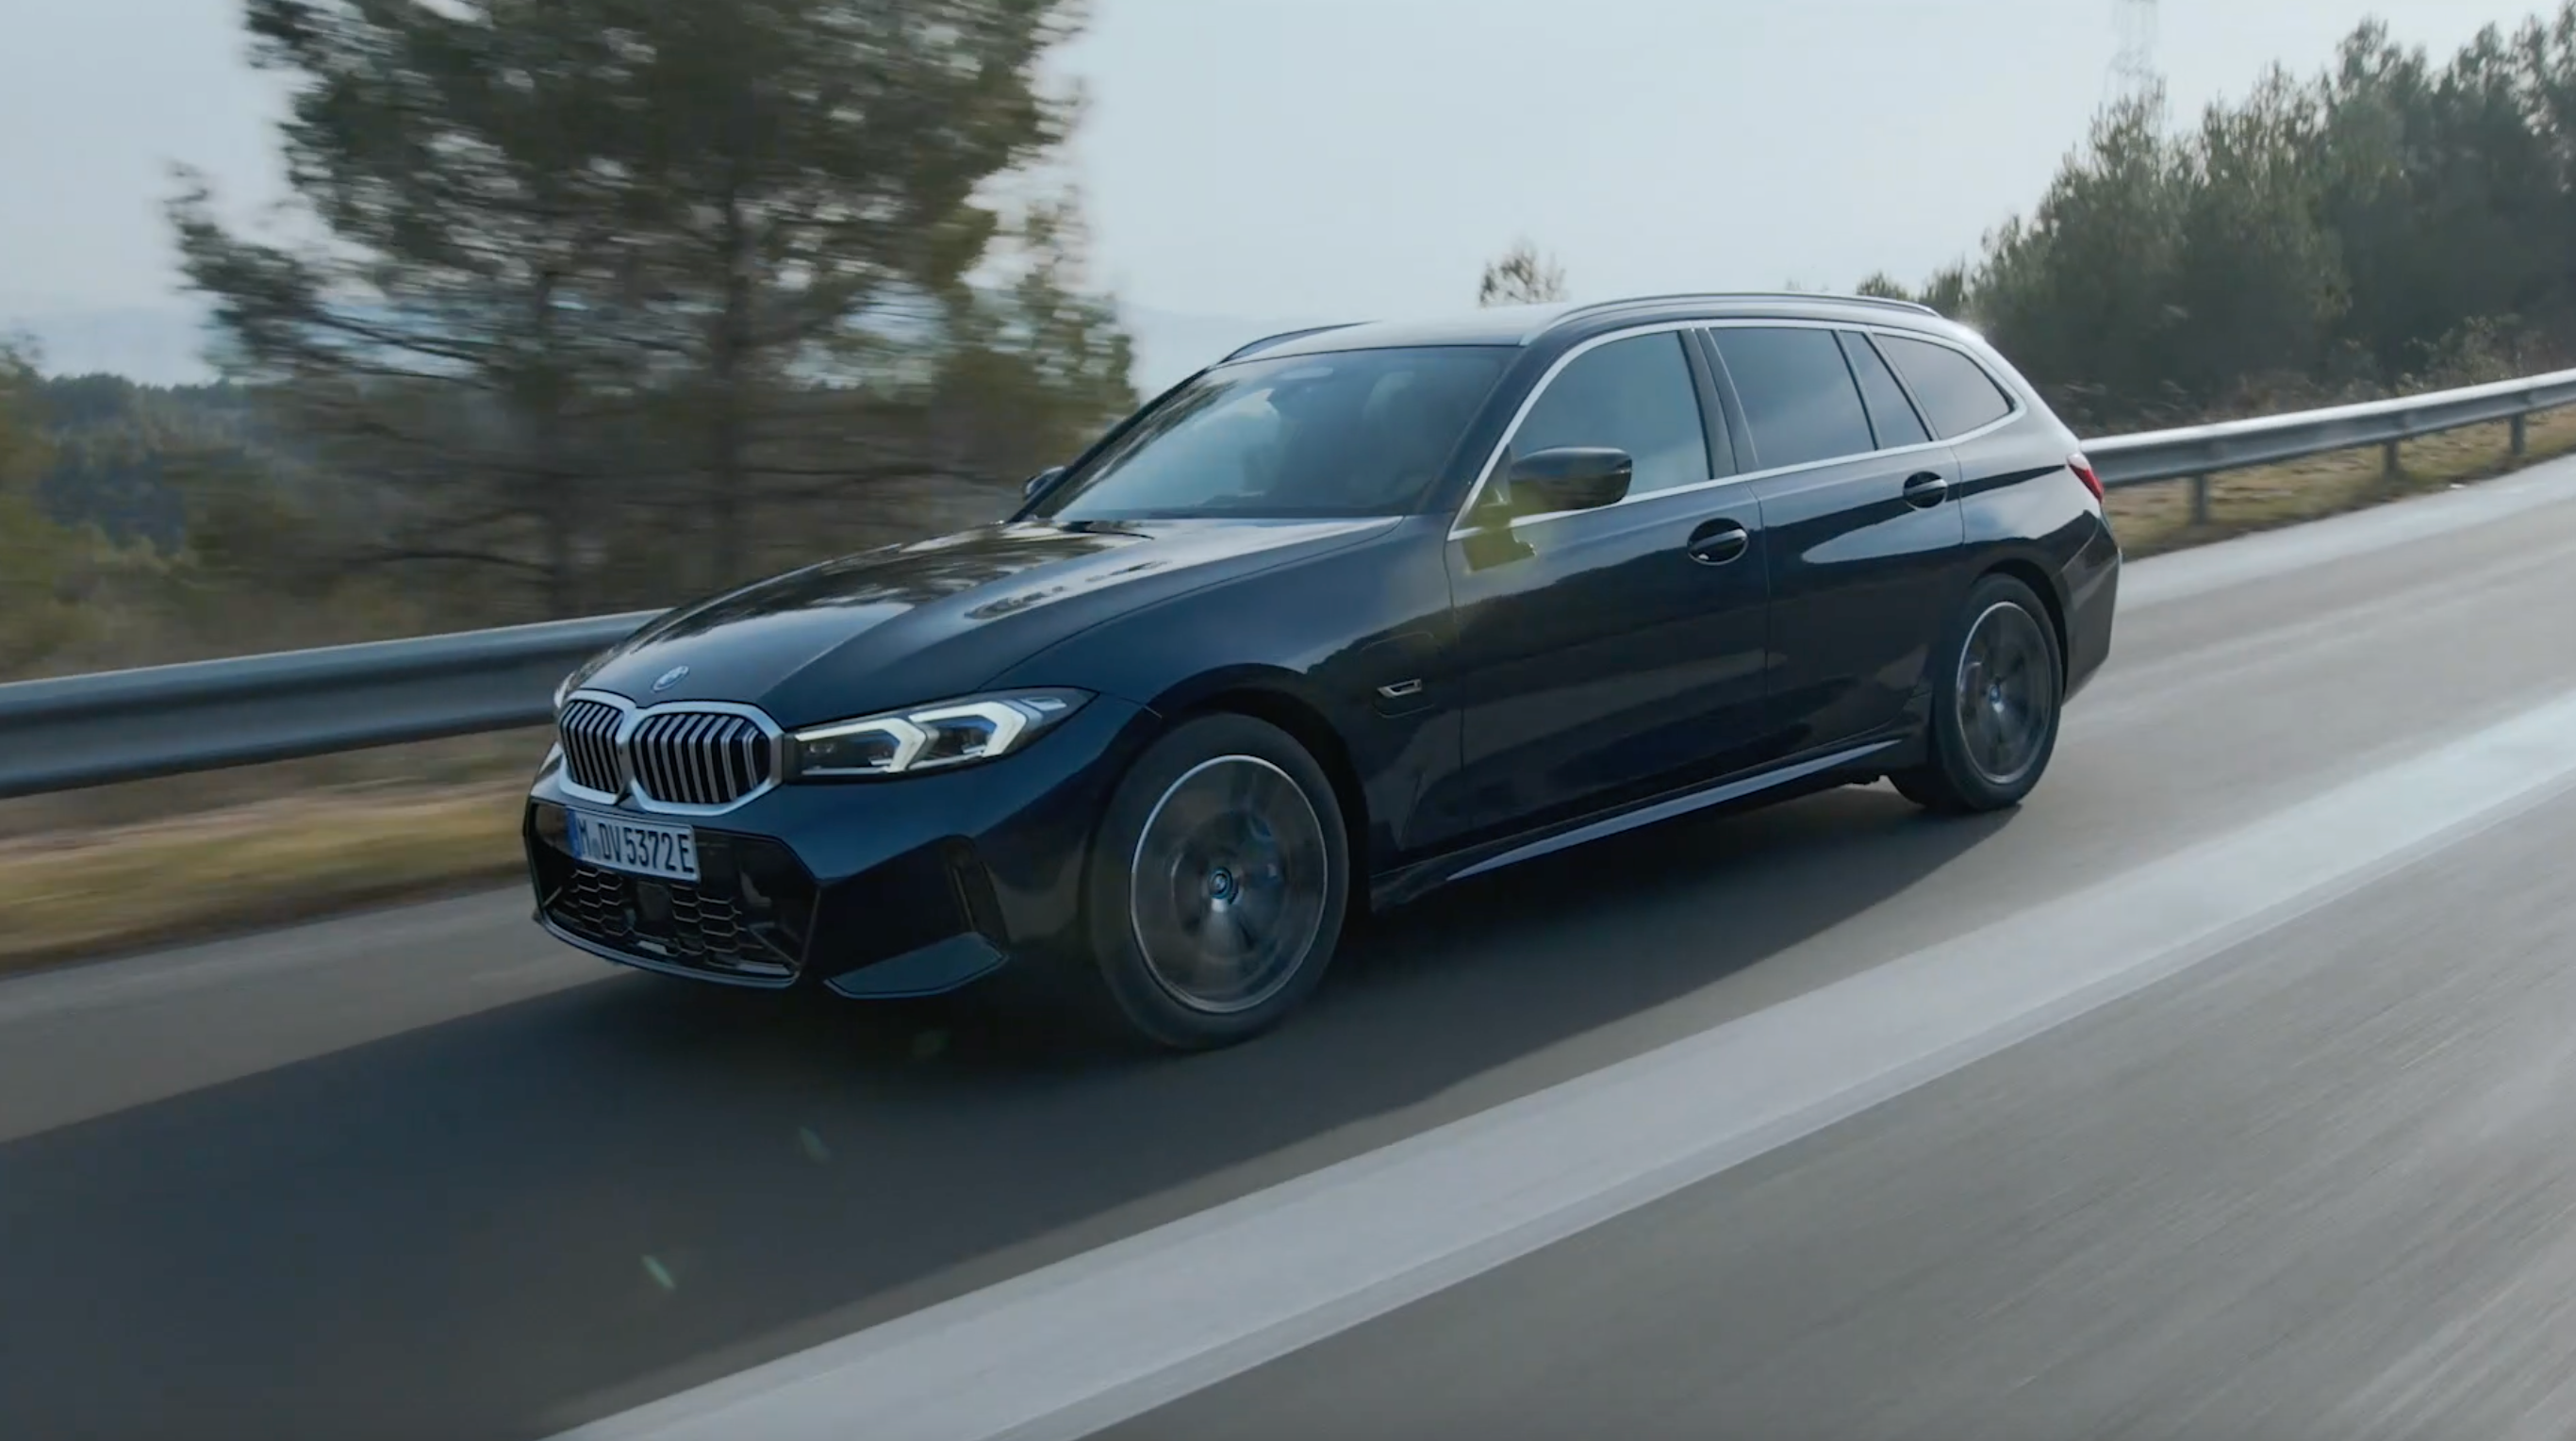 The new BMW 3 Series Sedan and the new BMW 3 Series Touring - Diverse drive portfolio, 8-speed Steptronic transmission now standard for all models